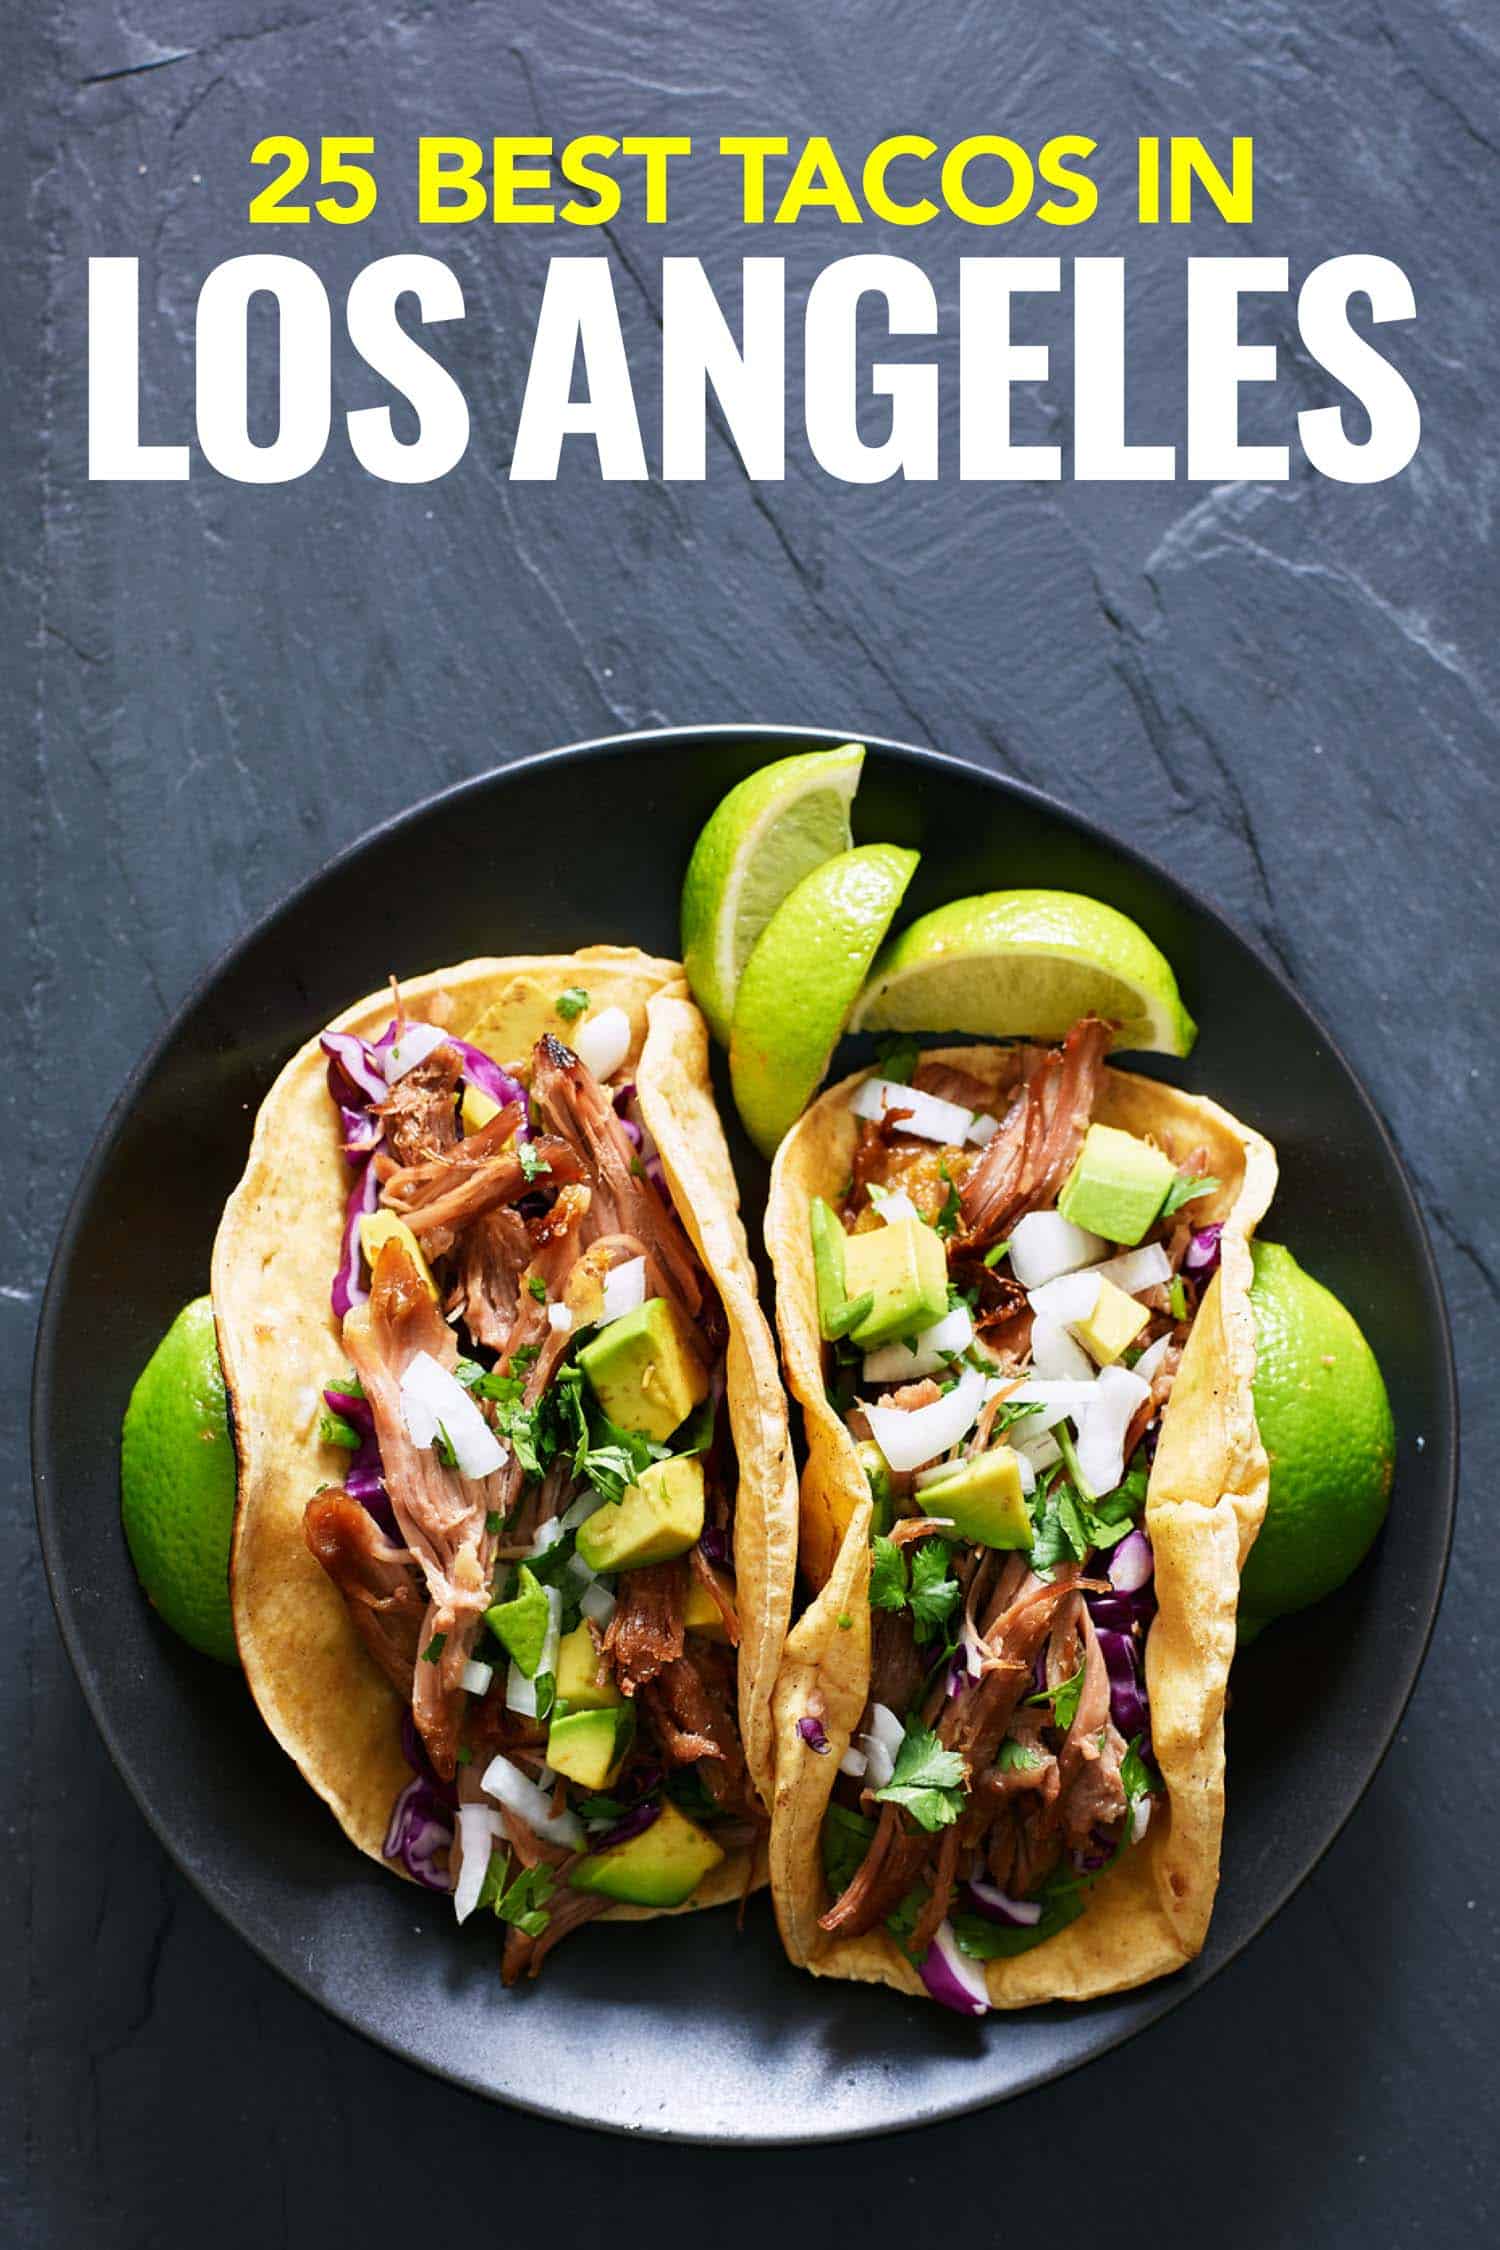 tacos on a plate and slate background